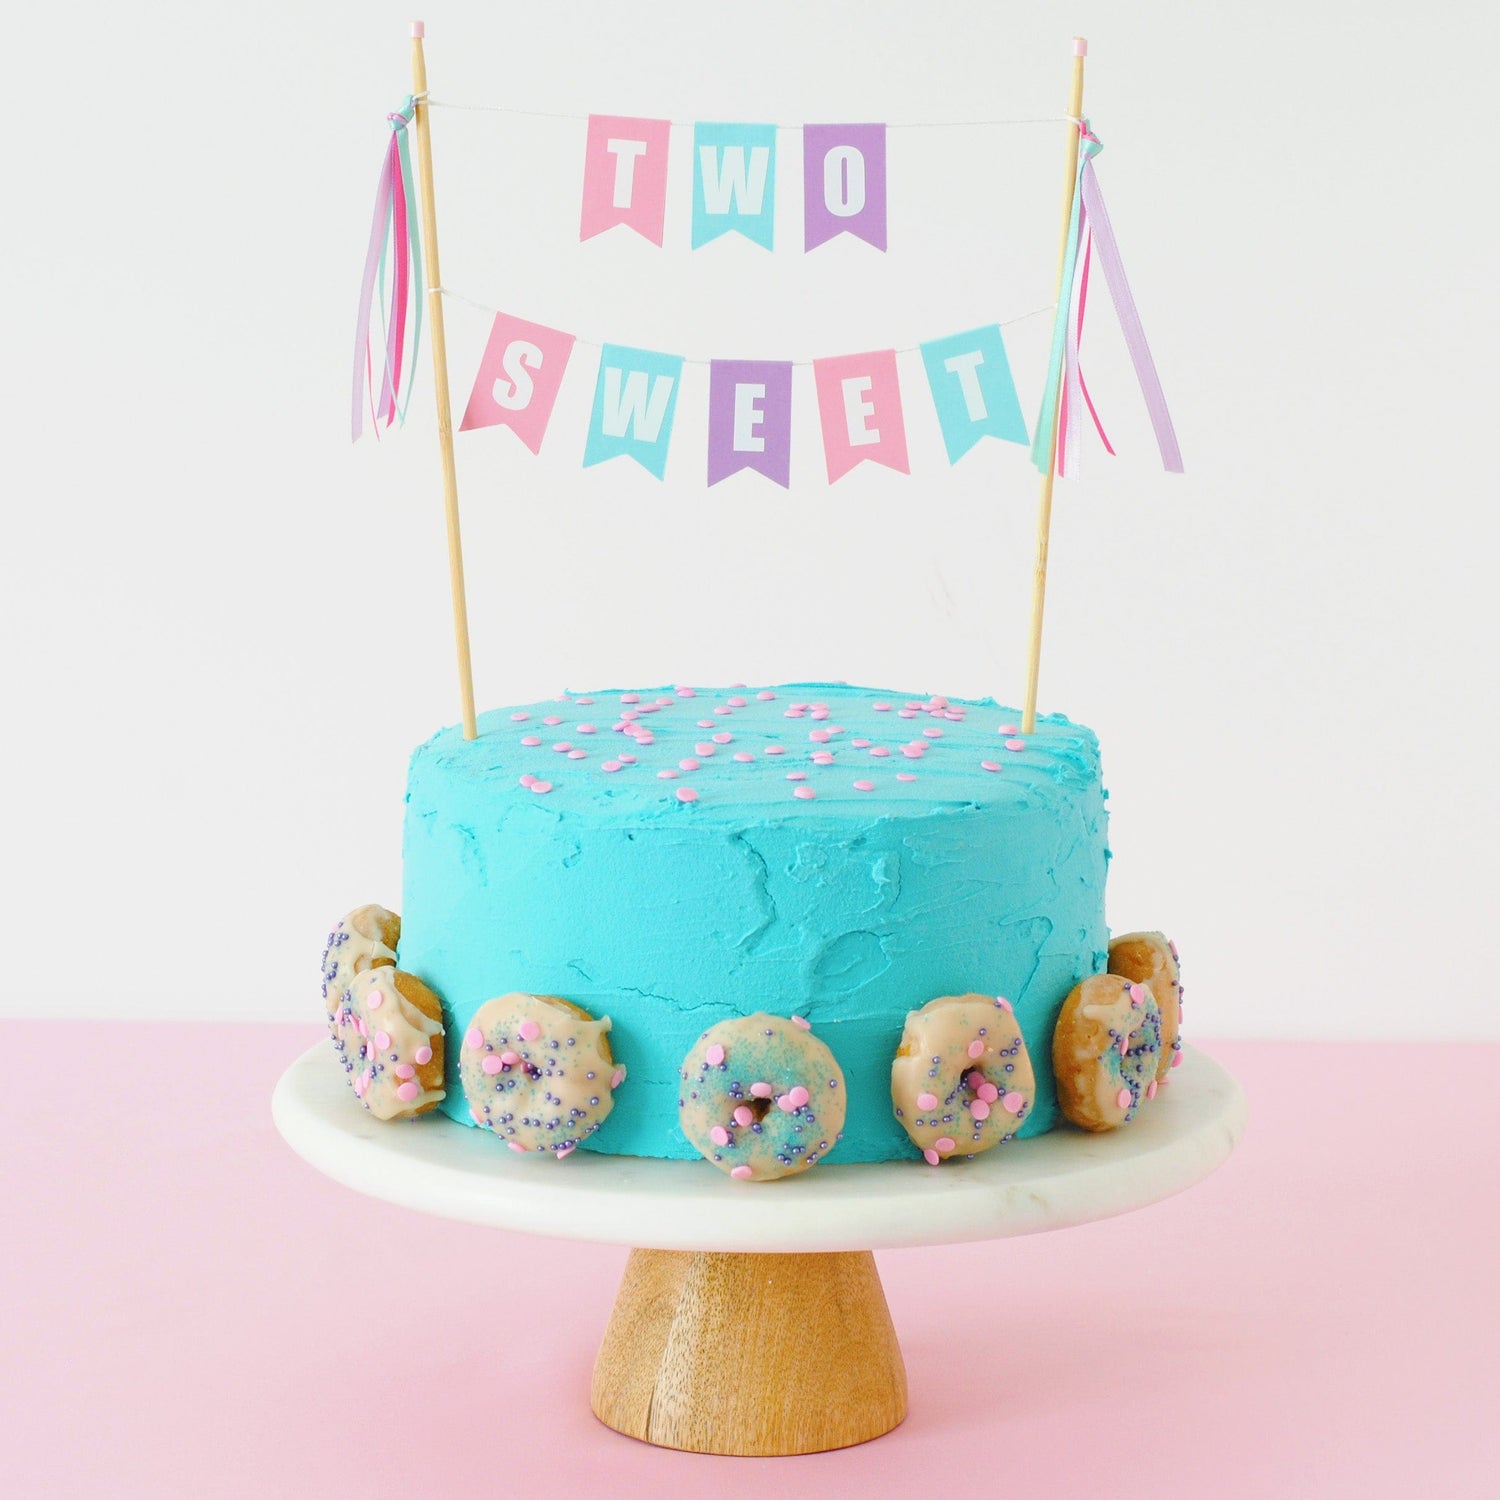 Two Sweet Birthday Party Ideas | Birthday donuts, Donut birthday parties,  Donut themed birthday party